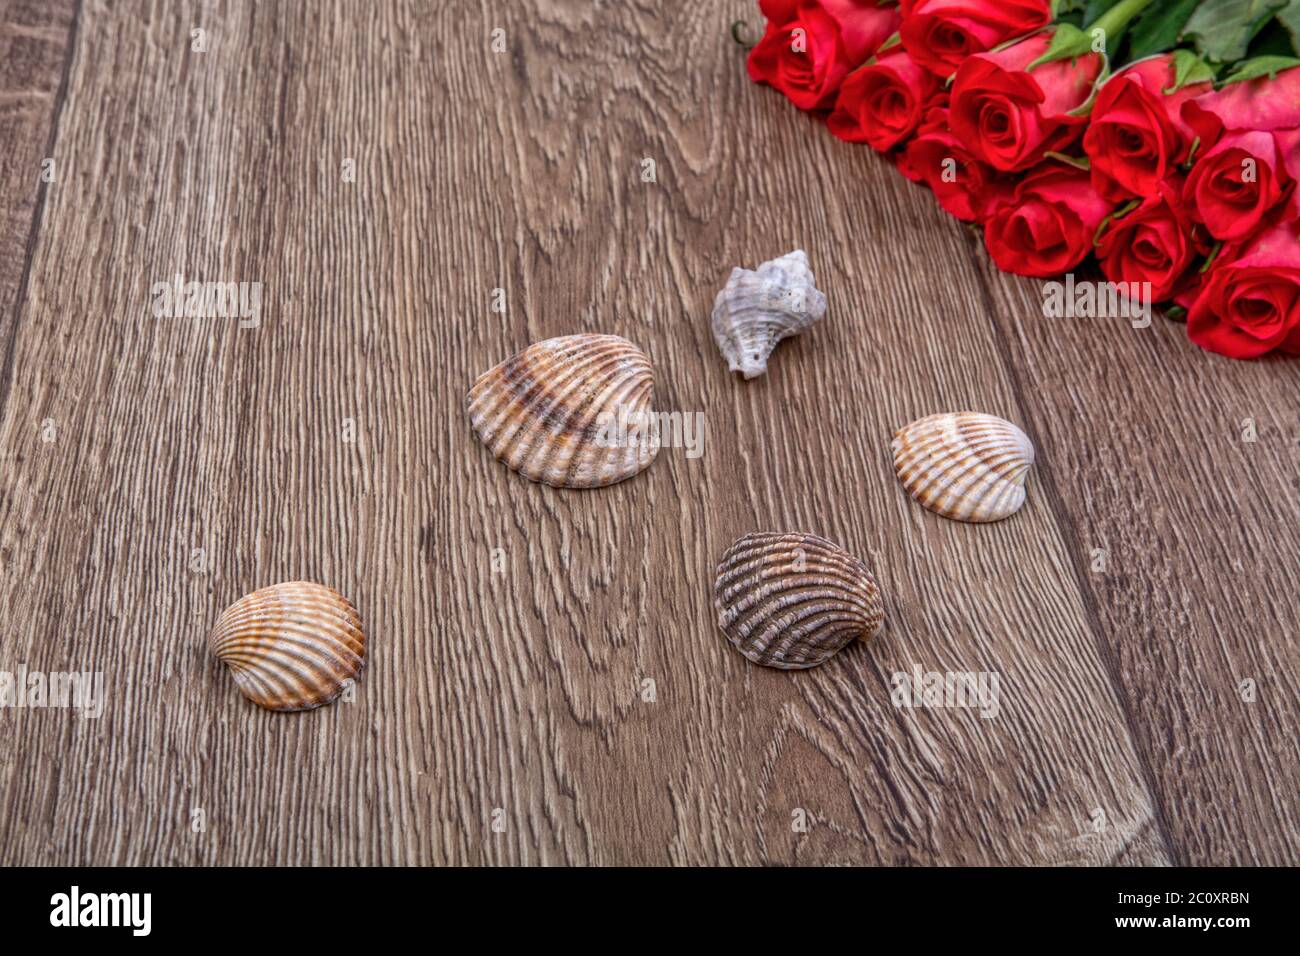 Sea shells and roses on a wooden background Stock Photo